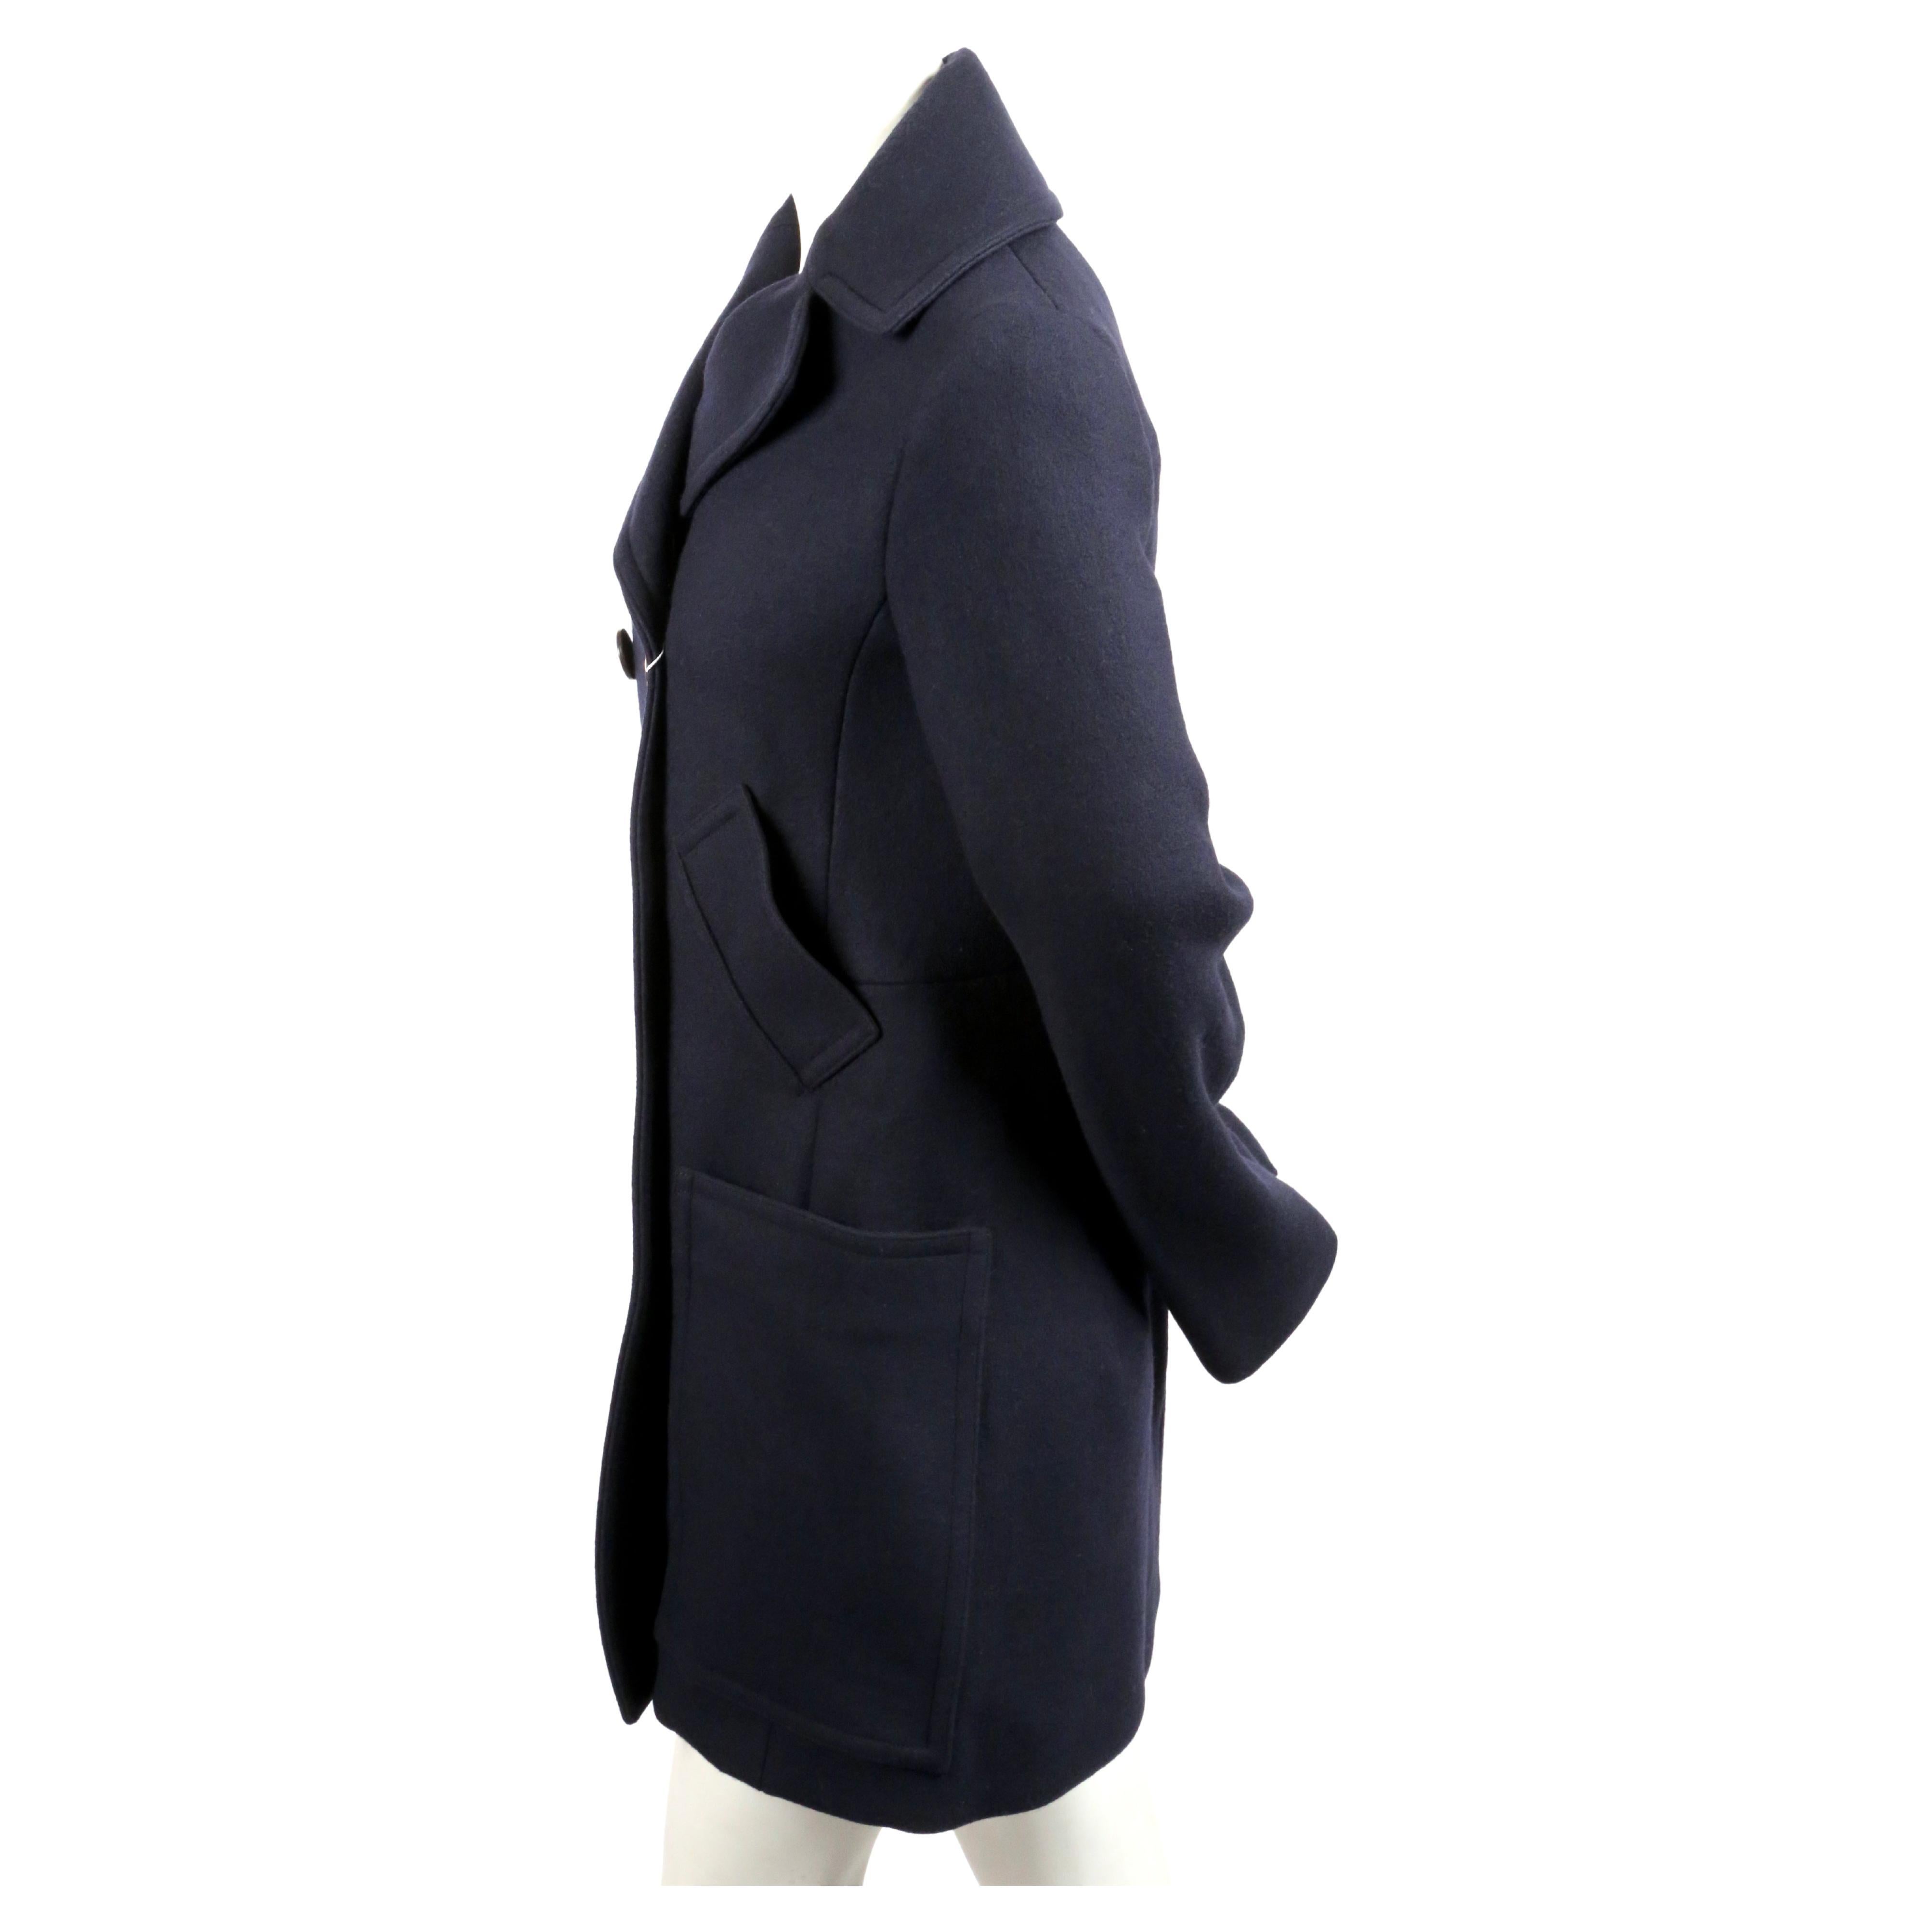 Deep navy-blue wool peacoat with large wrap-around patch pockets and single gold button detail designed by Phoebe Philo for Celine. French size 40 although this runs small and best fits a US 4-6. Approximate measurements: shoulder 16